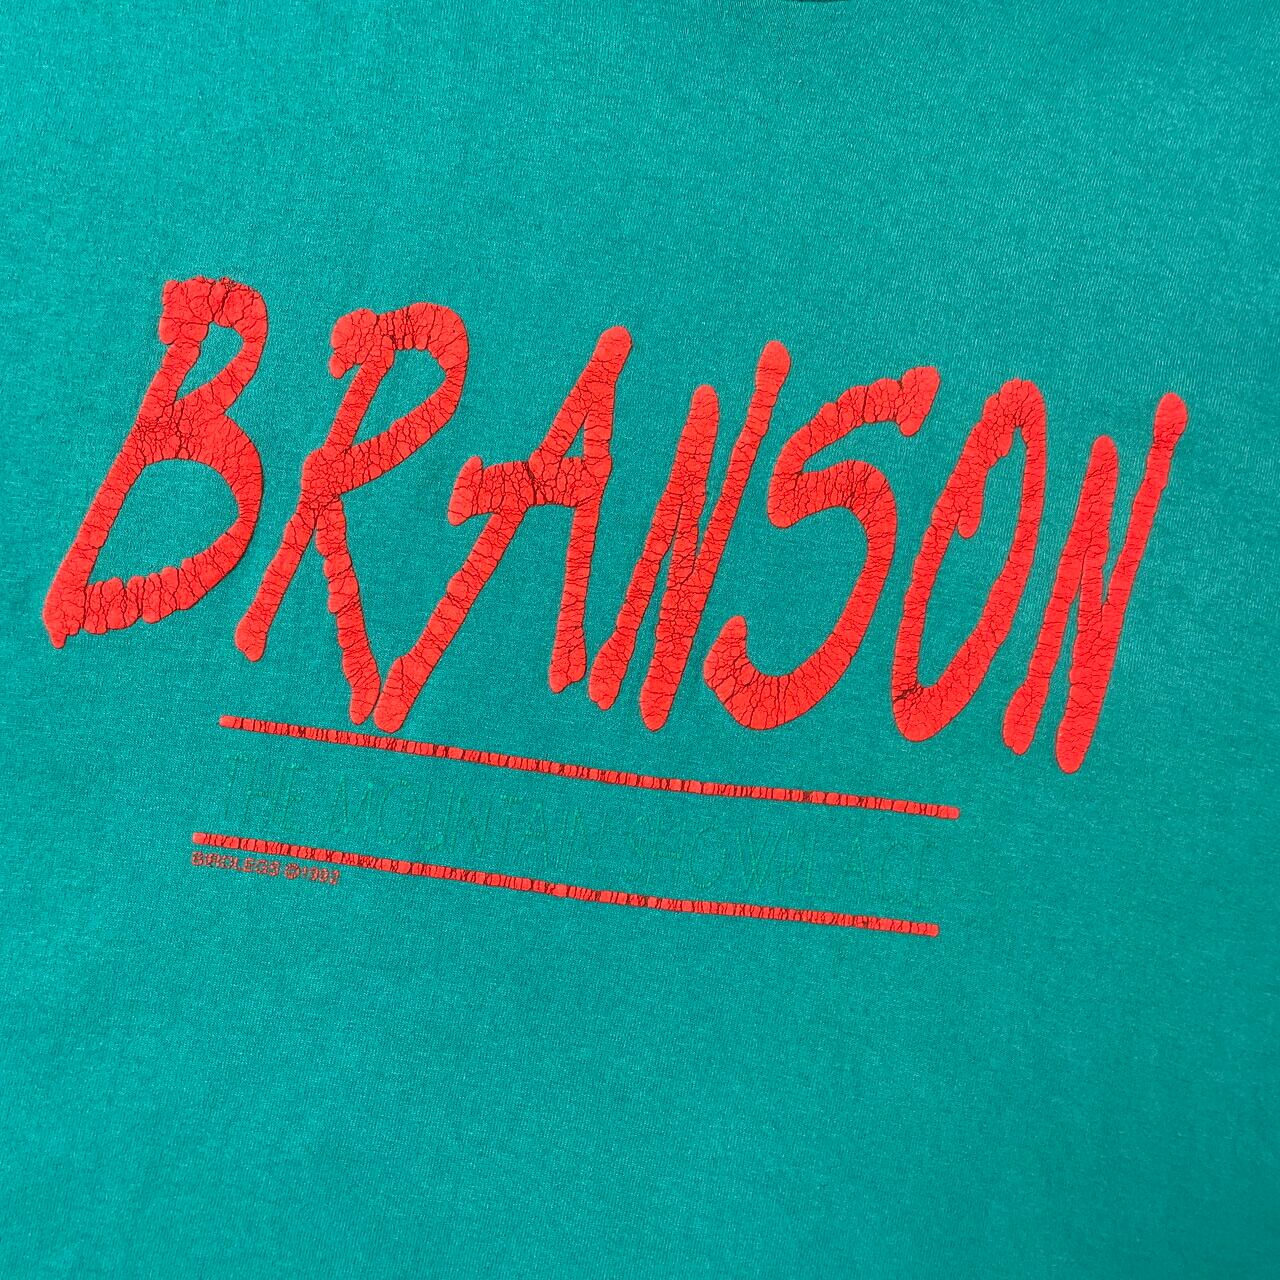 USA製 90年代 BRANSON THE MOUNTAIN SHOWPLACE スーベニア プリント Tシャツ メンズXL 古着 90s ビンテージ  ヴィンテージ シングルステッチ ターコイズグリーン 【Tシャツ】 | cave 古着屋【公式】古着通販サイト powered by BASE